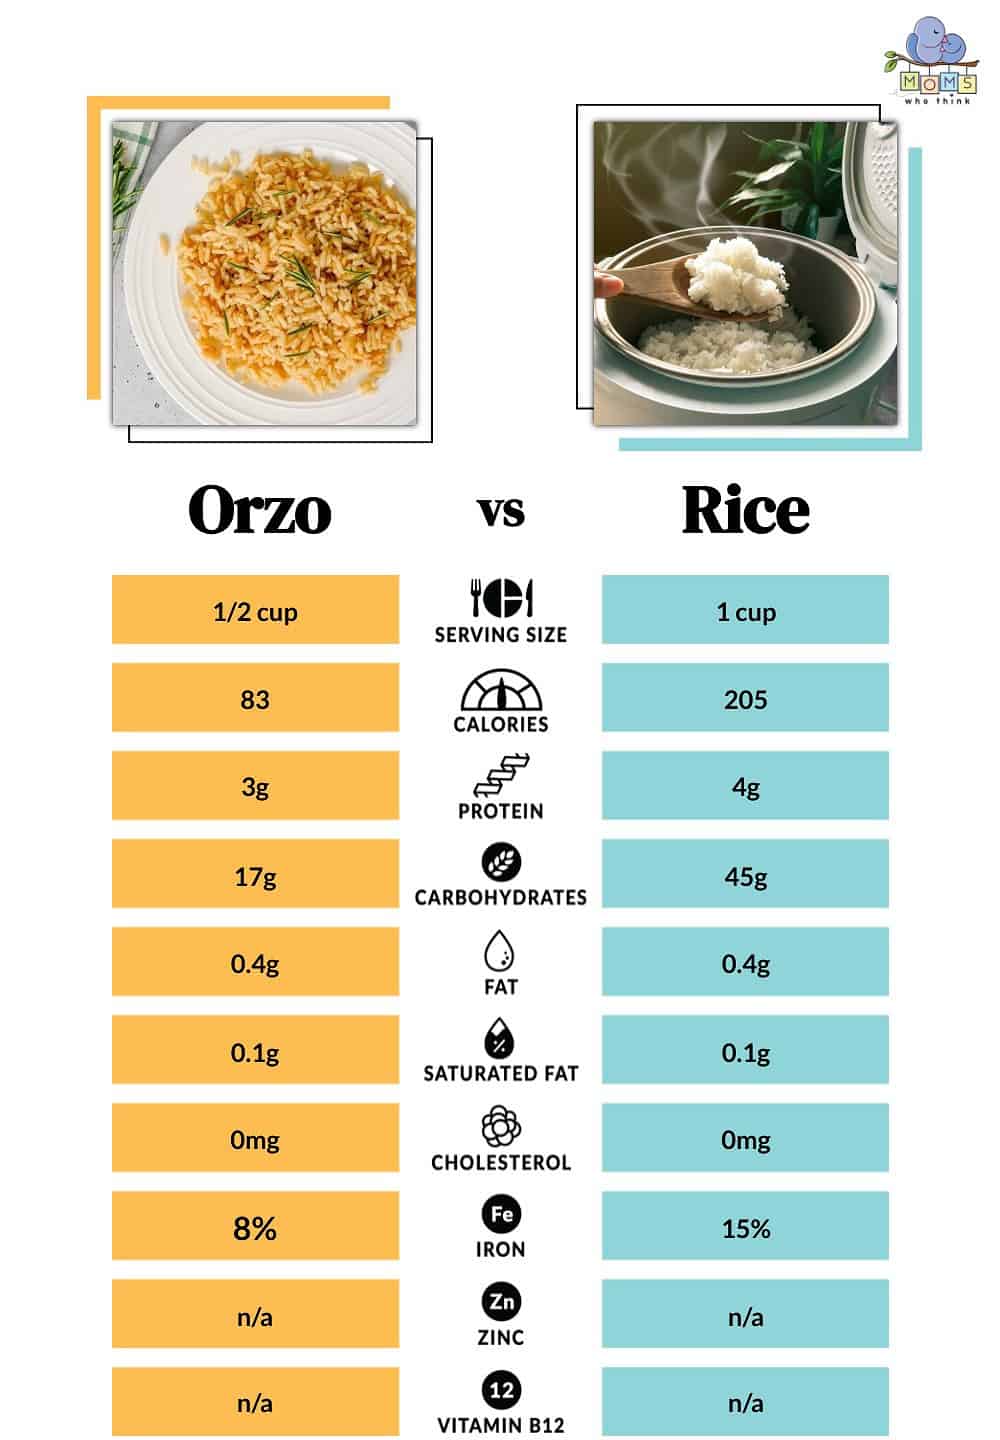 Orzo vs Rice Nutritional Facts